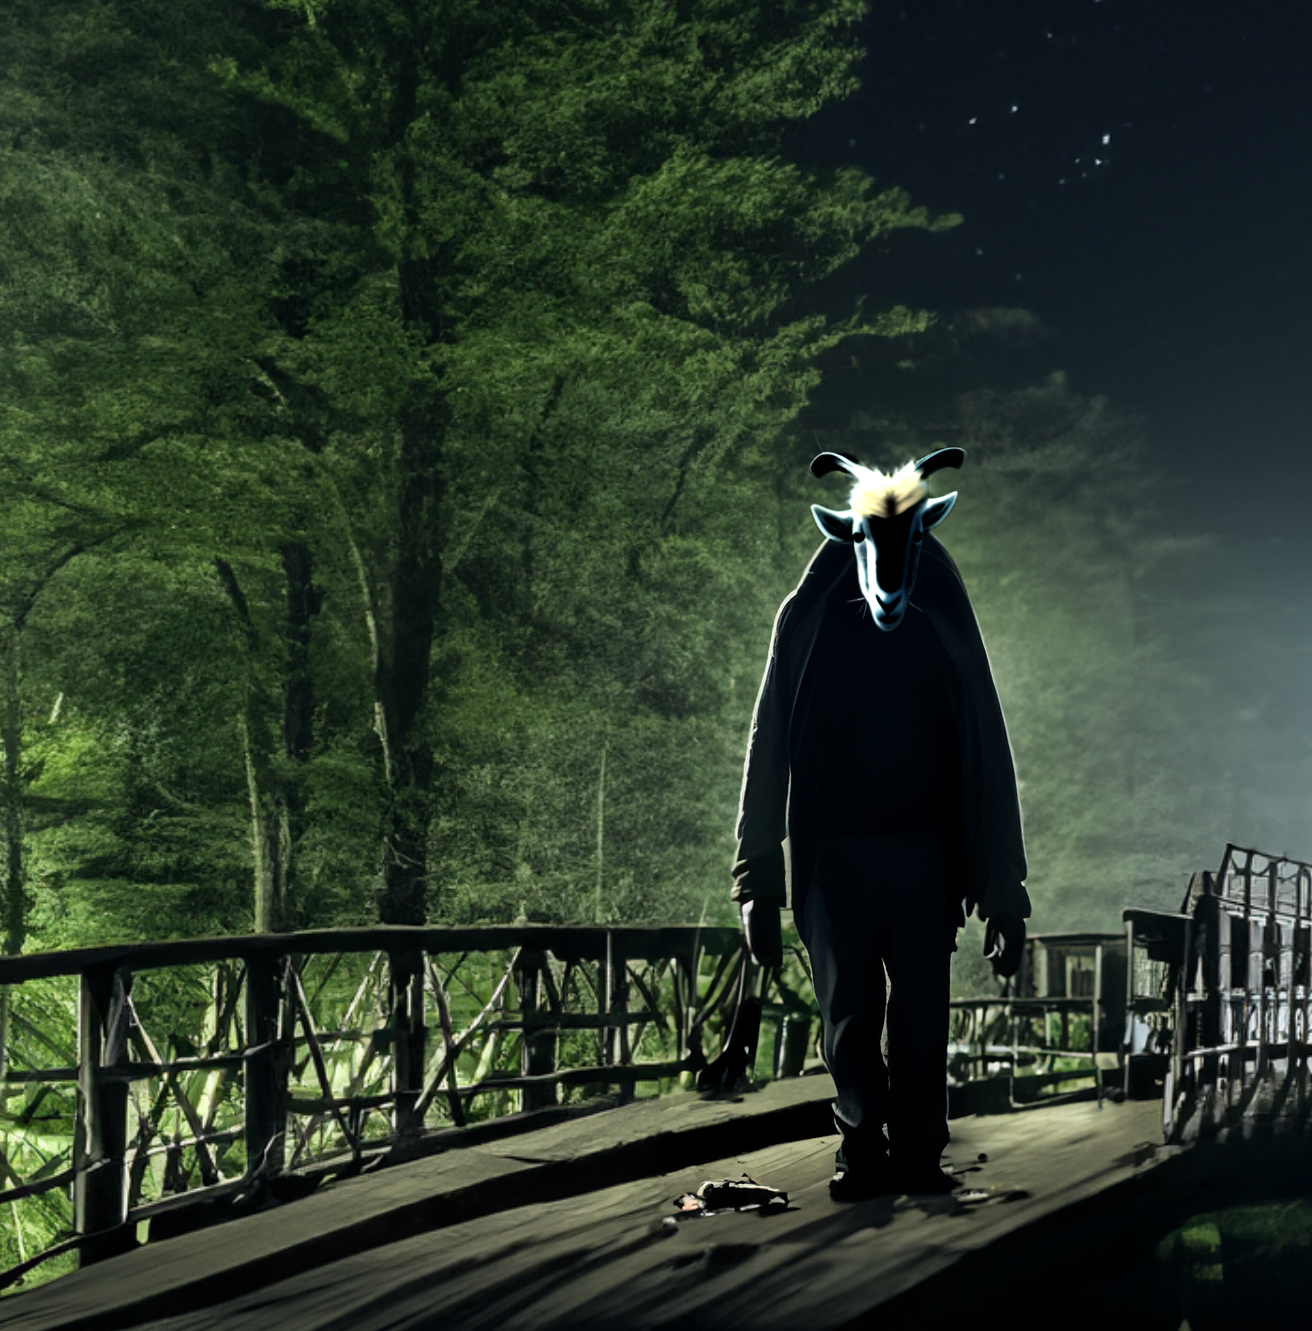 5 Things You May Not Know About Goatman's Bridge